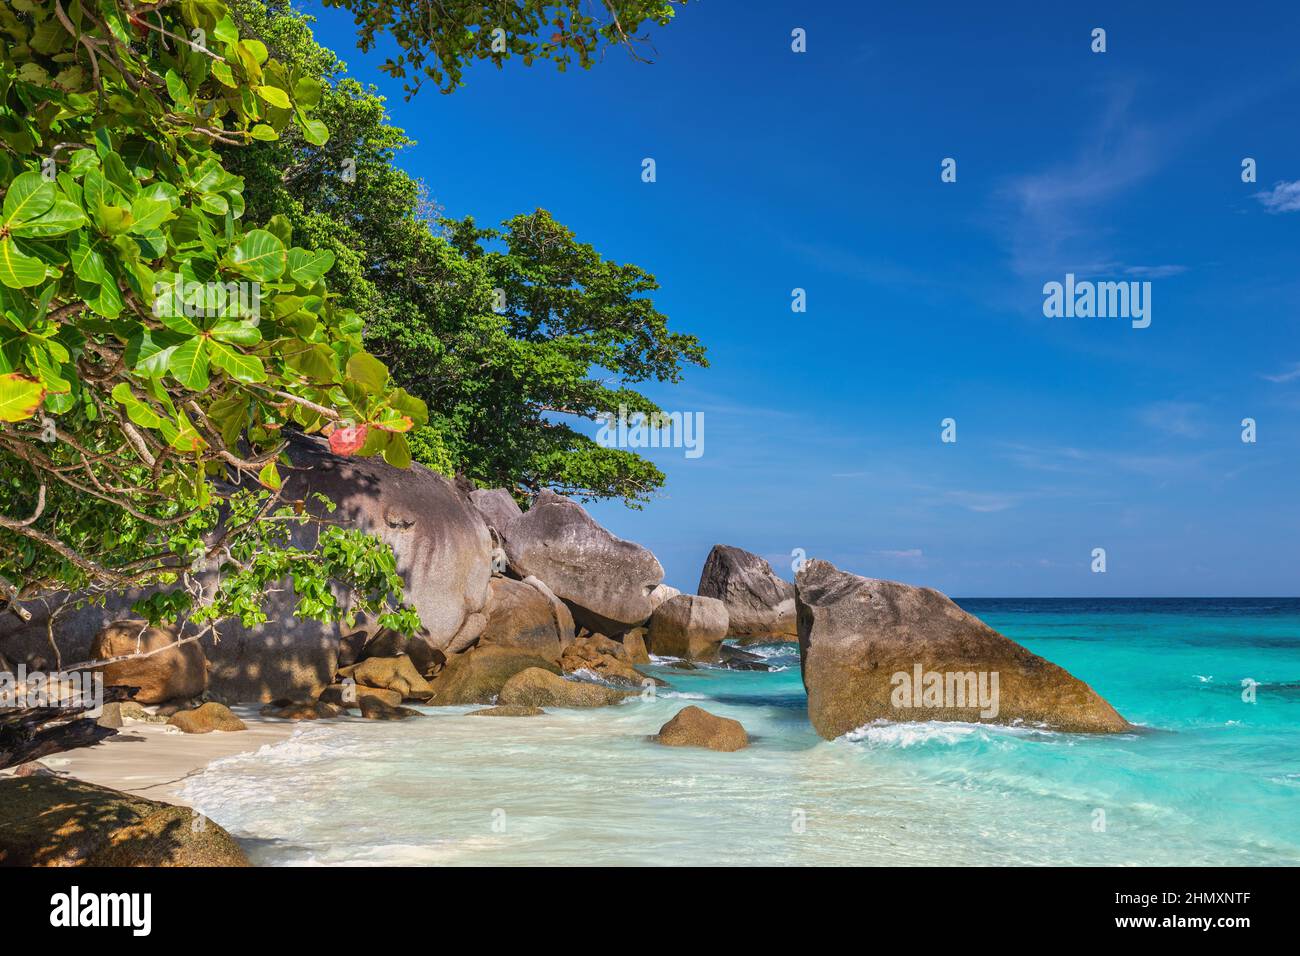 Tropical islands of ocean blue sea water and white sand beach at Similan Islands, Phang Nga Thailand nature landscape Stock Photo